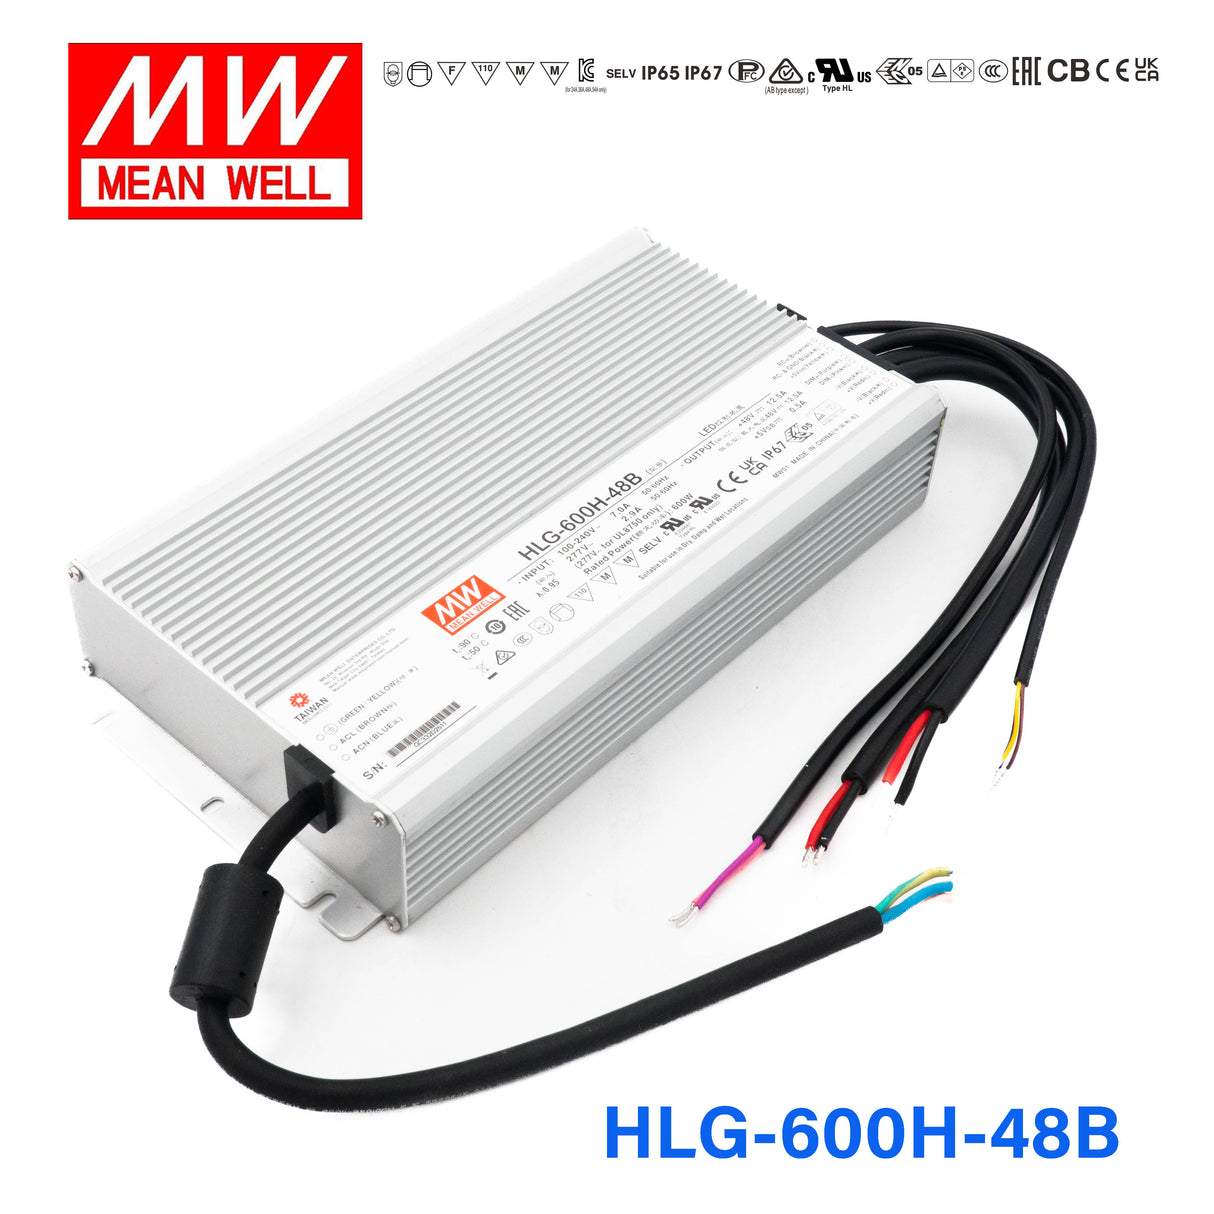 Mean Well HLG-600H-48B Power Supply 600W 48V- Dimmable